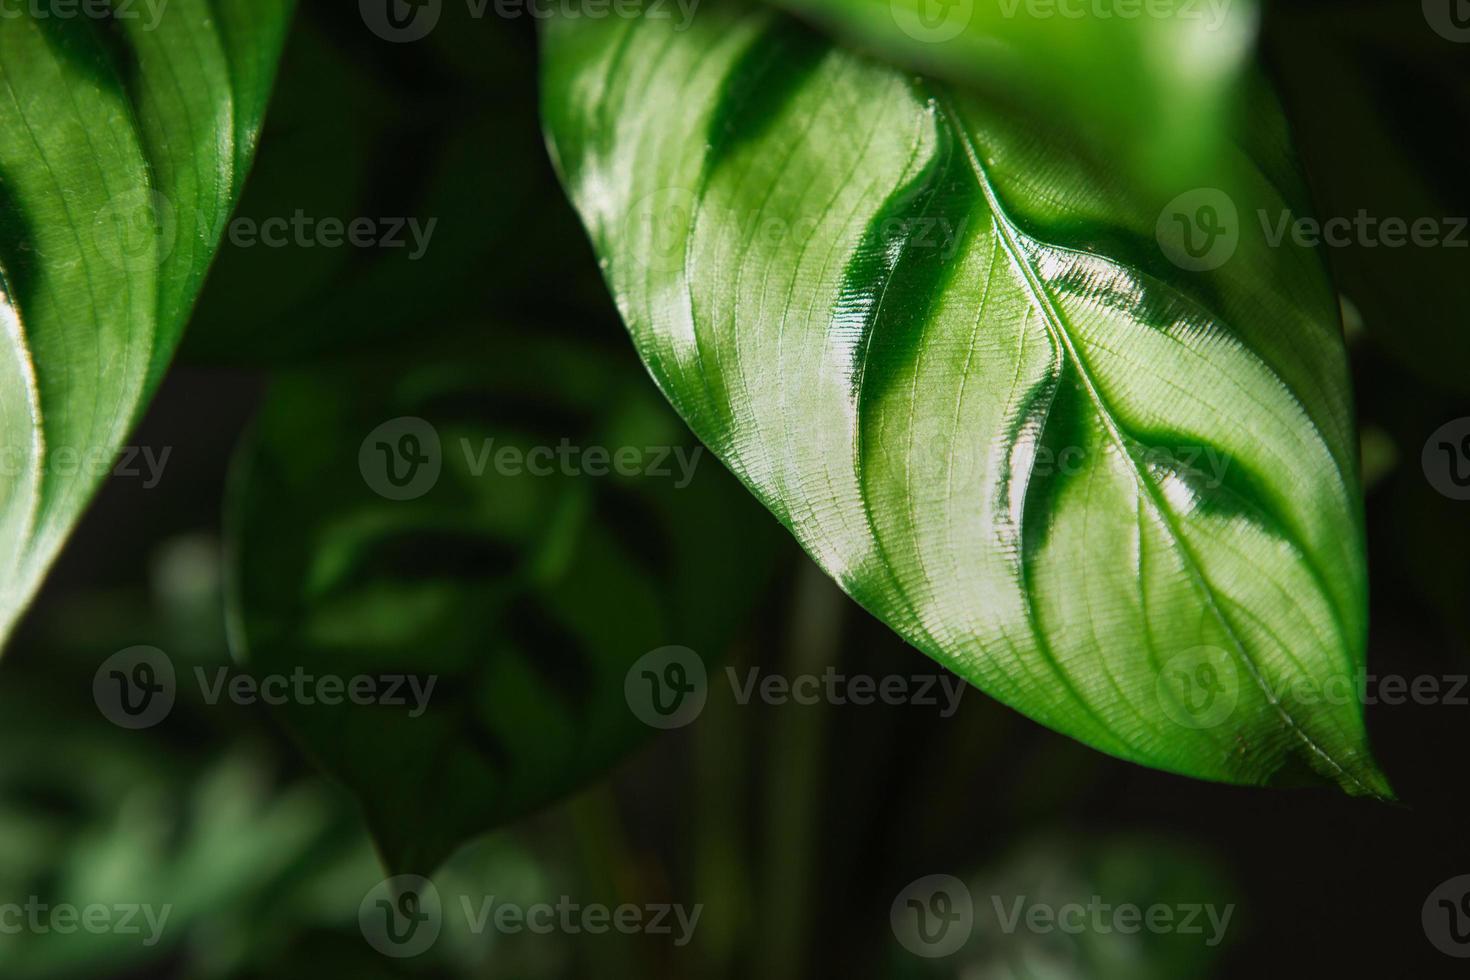 Calathea leopardina green pattern leaf close-up. Potted house plants, green home decor, care and cultivation, marantaceae variety. photo